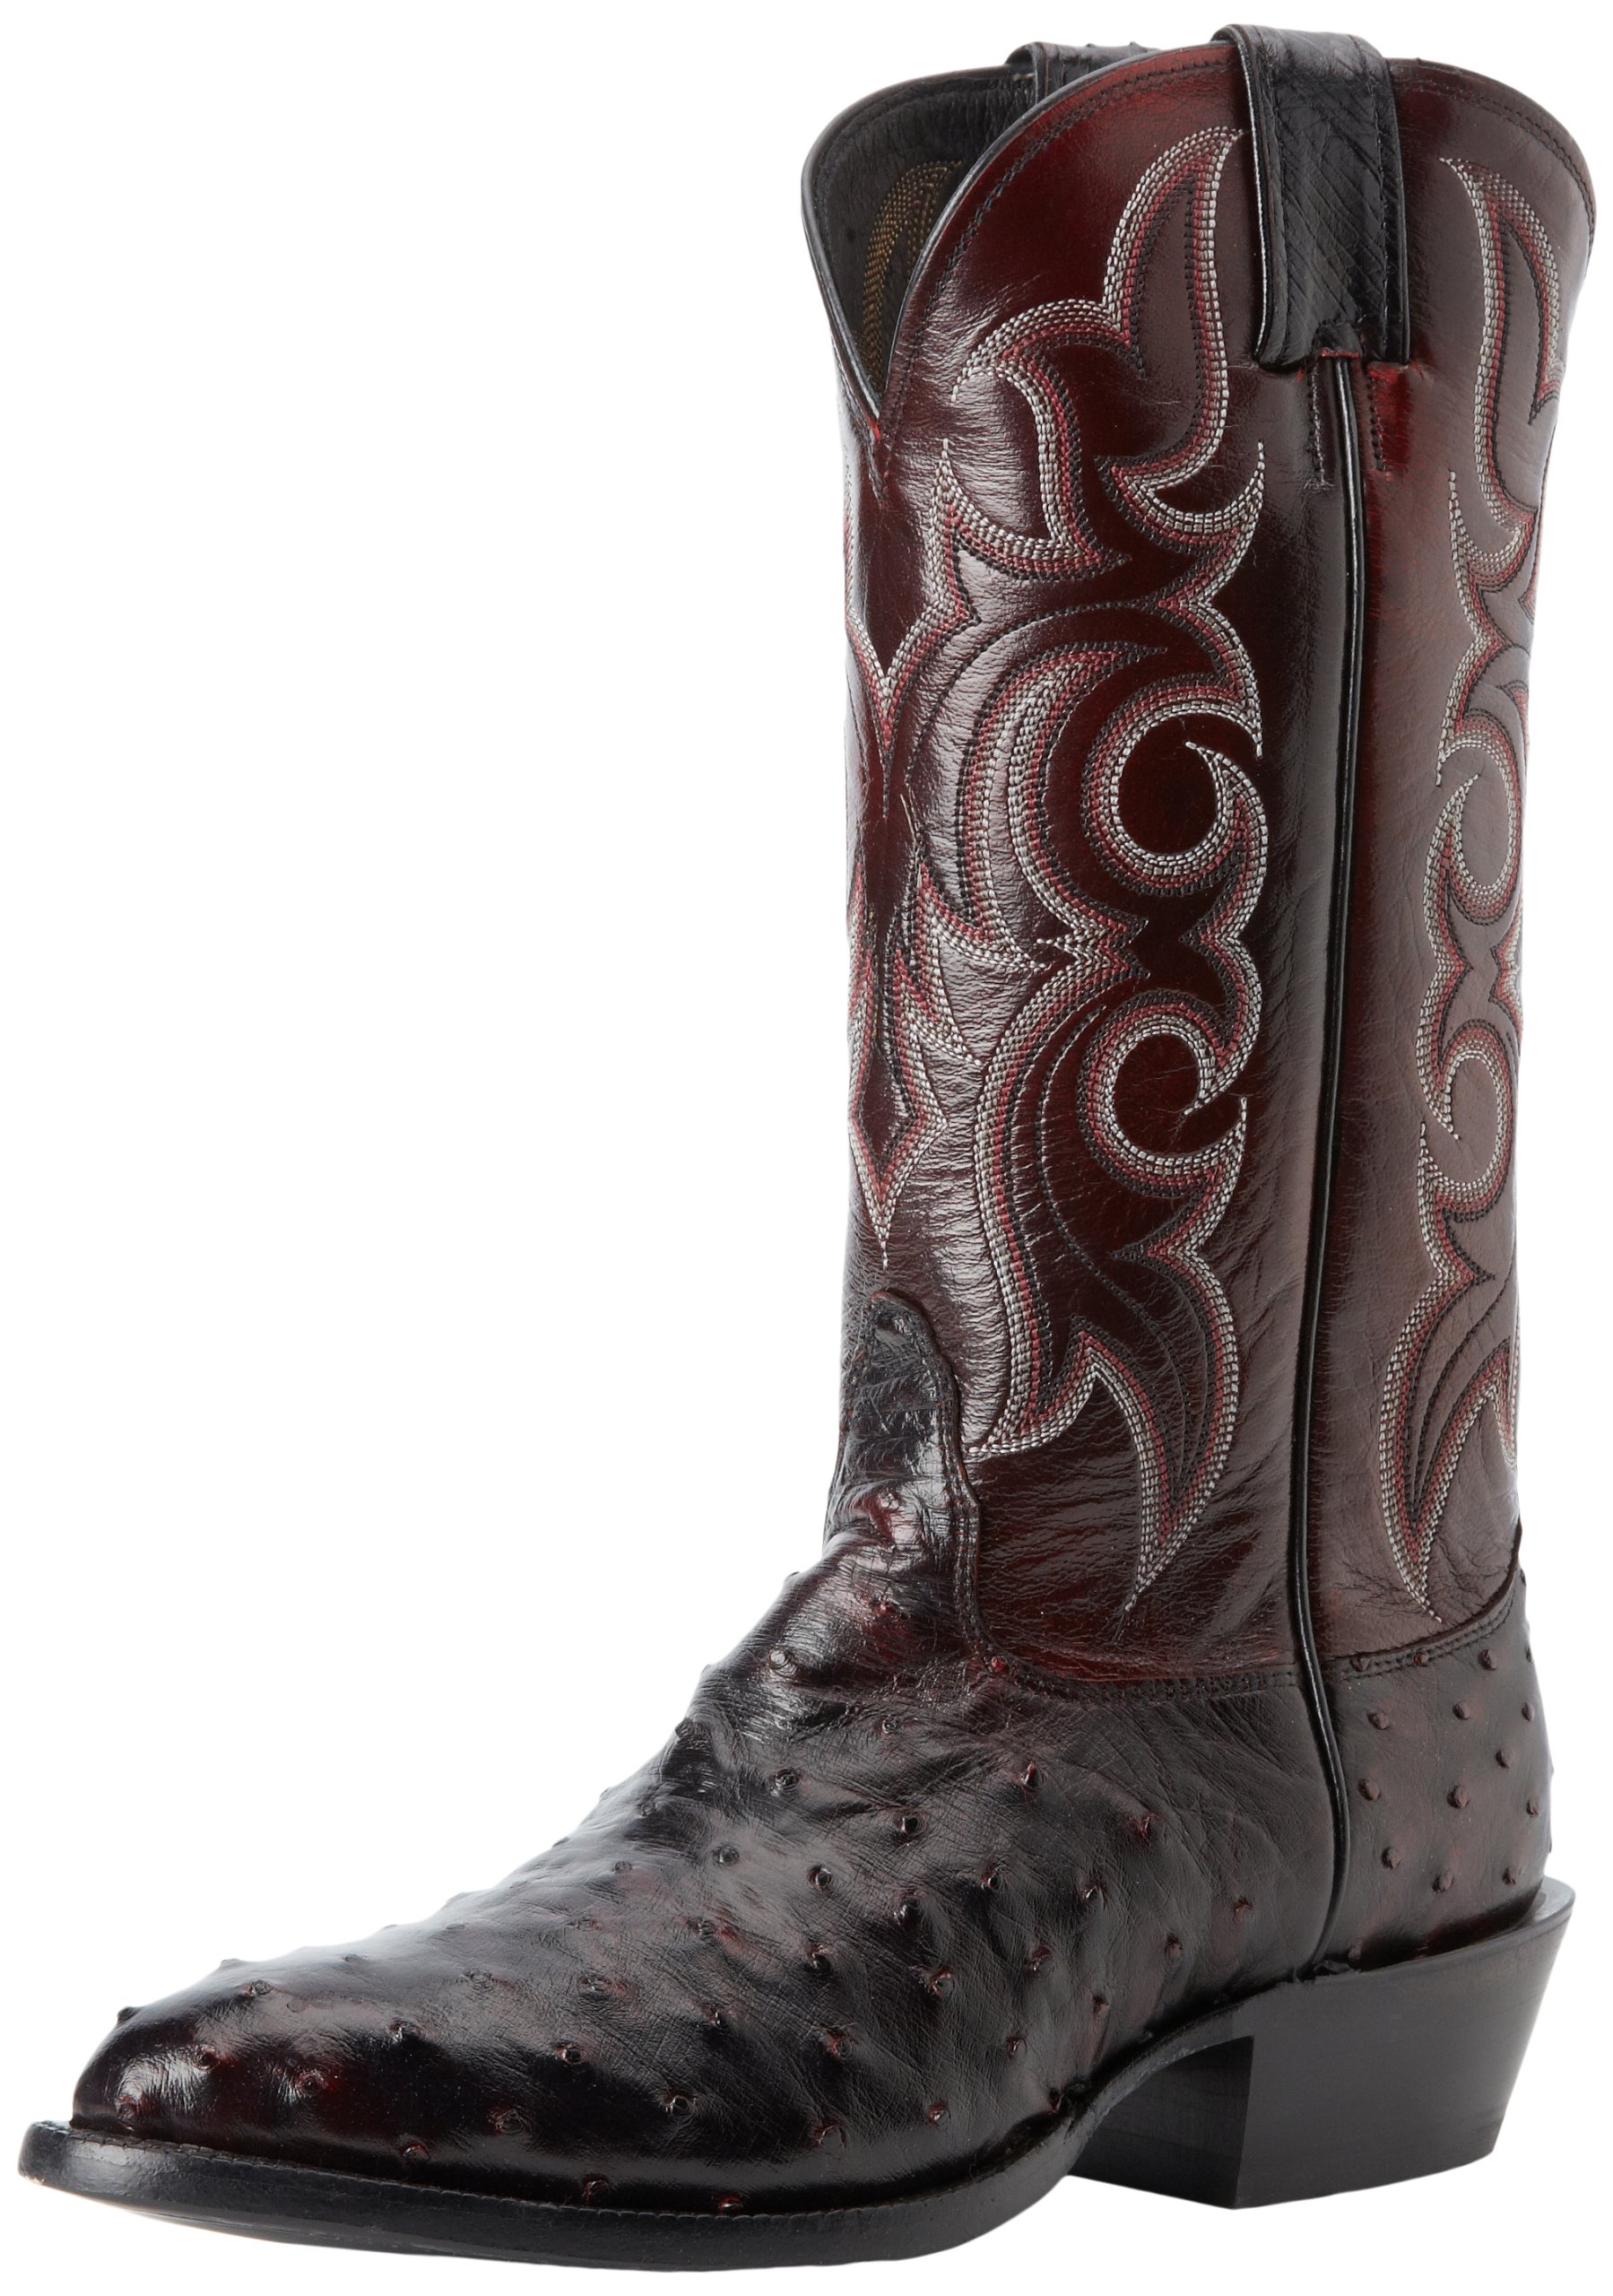 Nocona Boots Men's MD8506 Boot,Black Cherry Full Quill,6 EE US - image 2 of 6